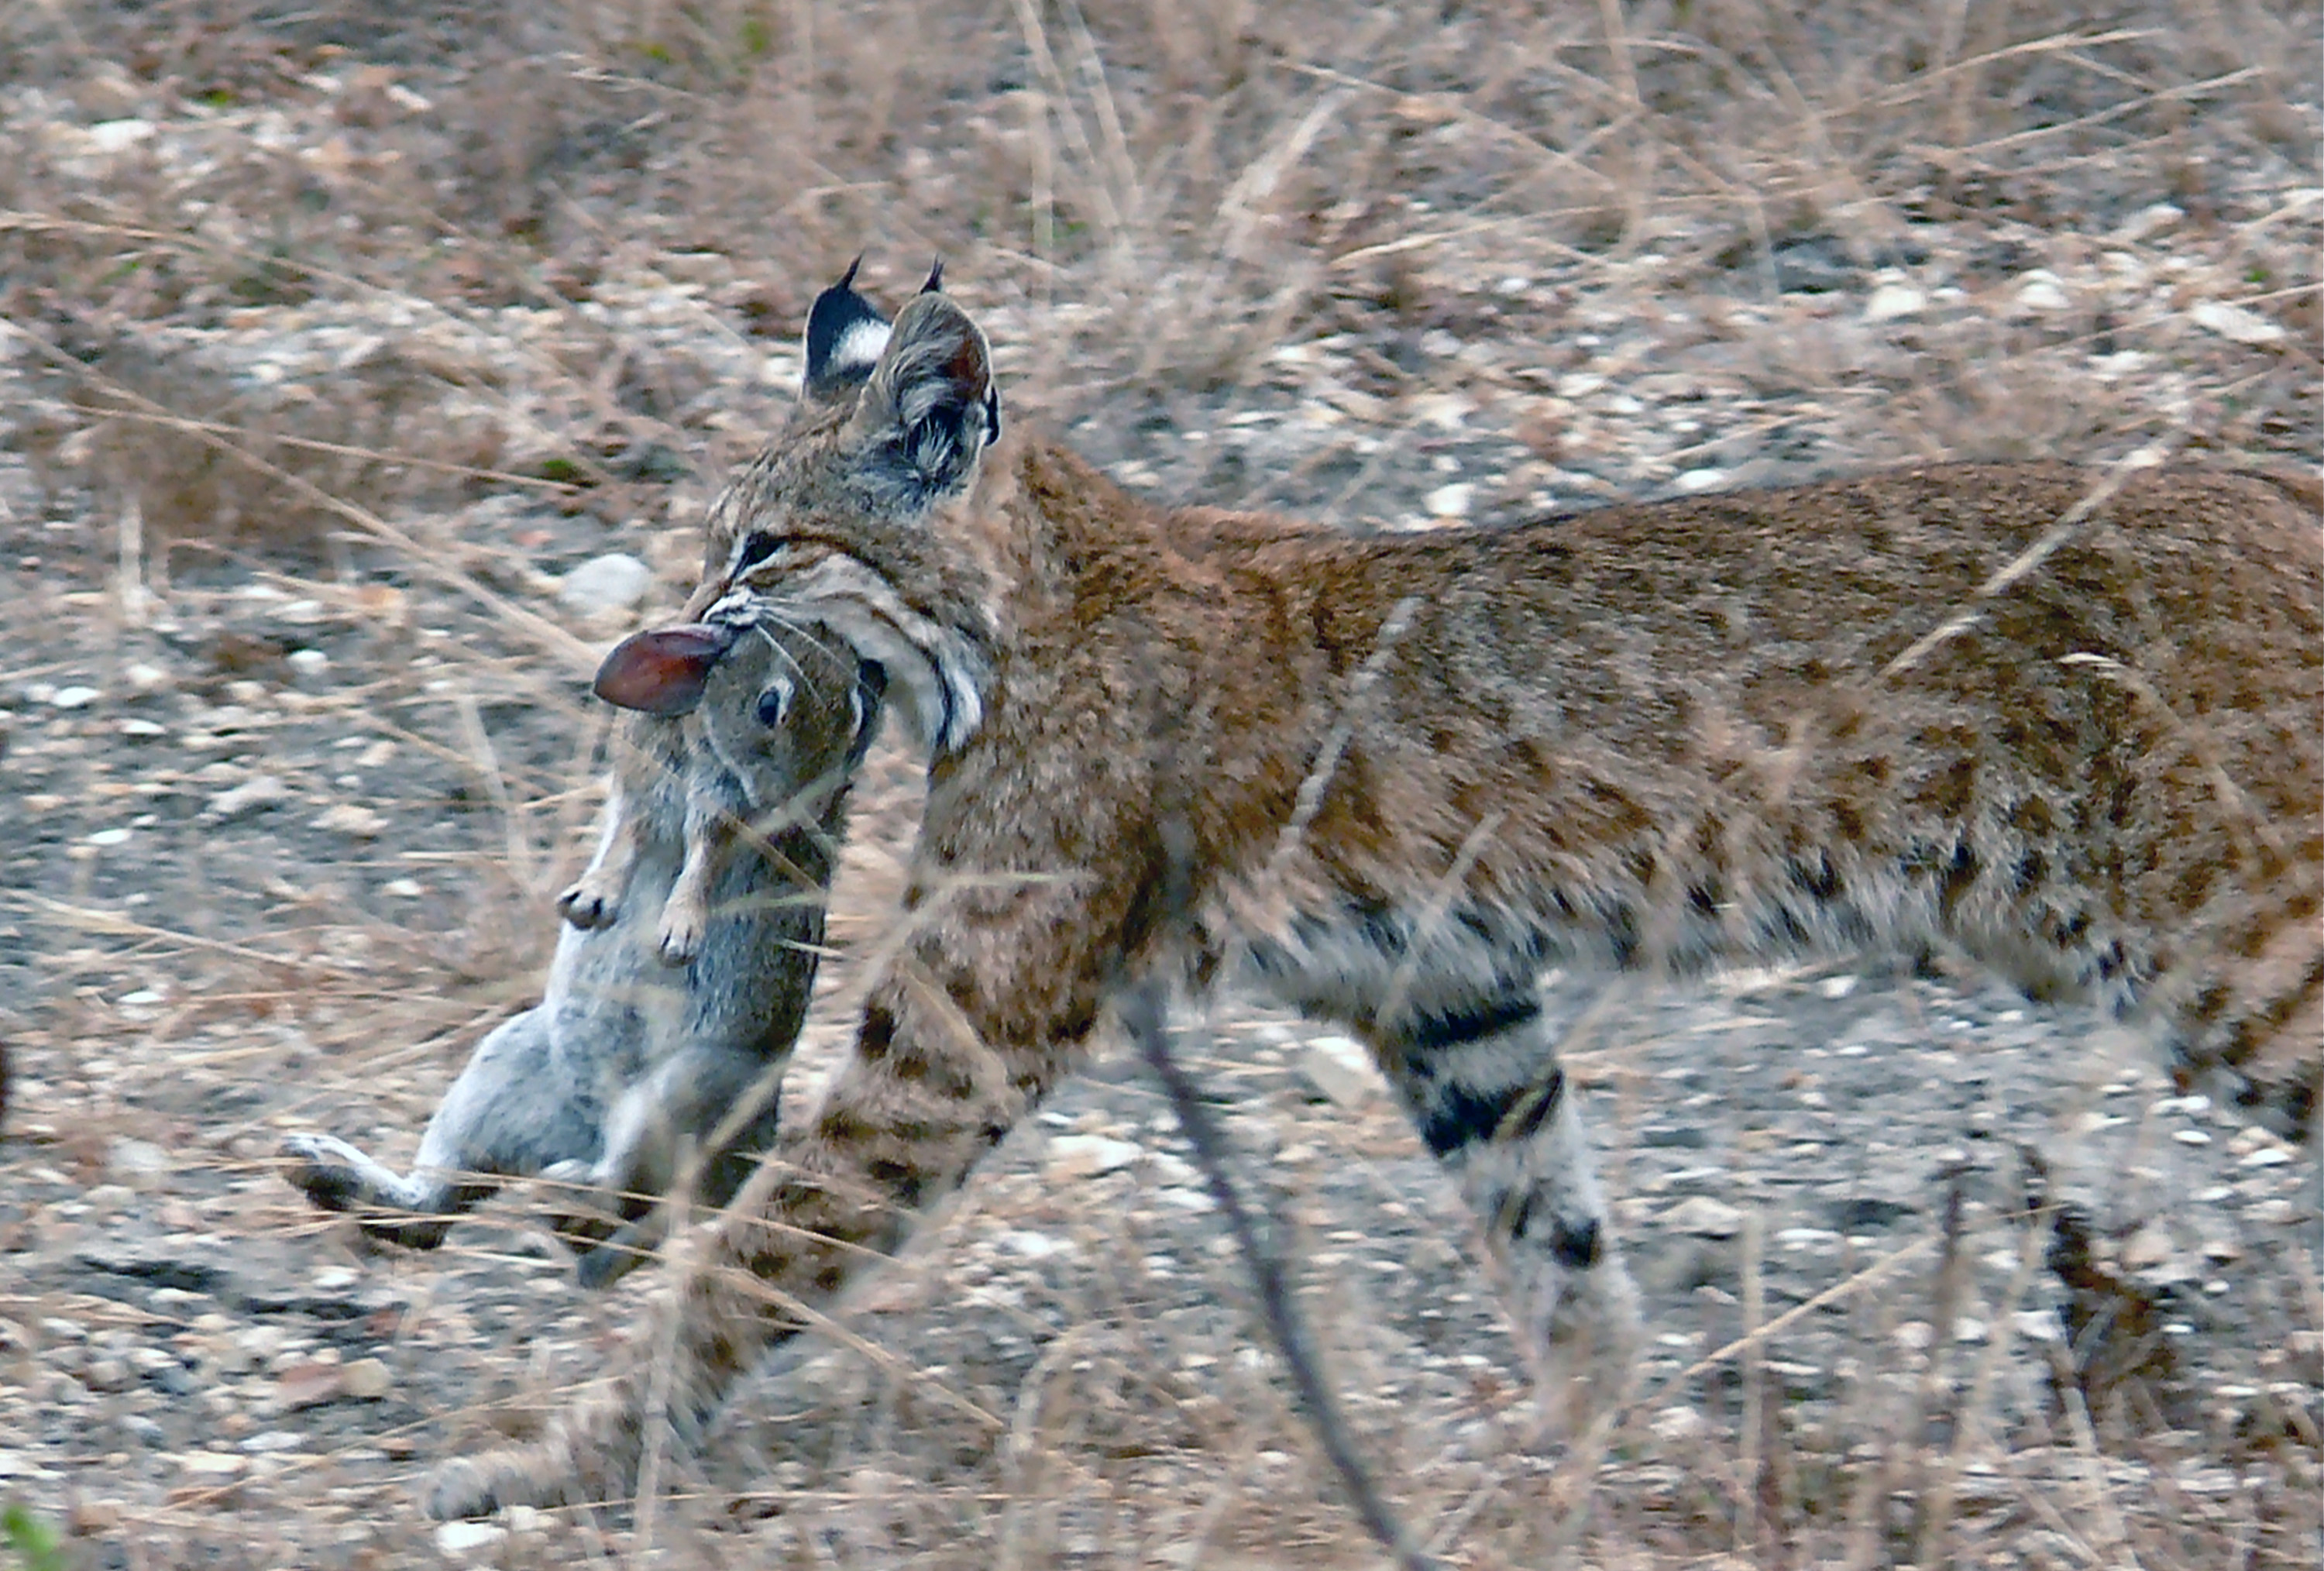 New research shows that the co-evolution of species can affect predator-prey relationships in substantial ways, potentially reversing traditional population cycles. In this photo, a bobcat catches a rabbit in Montana de Oro State Park in California. (Photo by Linda Tanner, available through Wikimedia Commons)